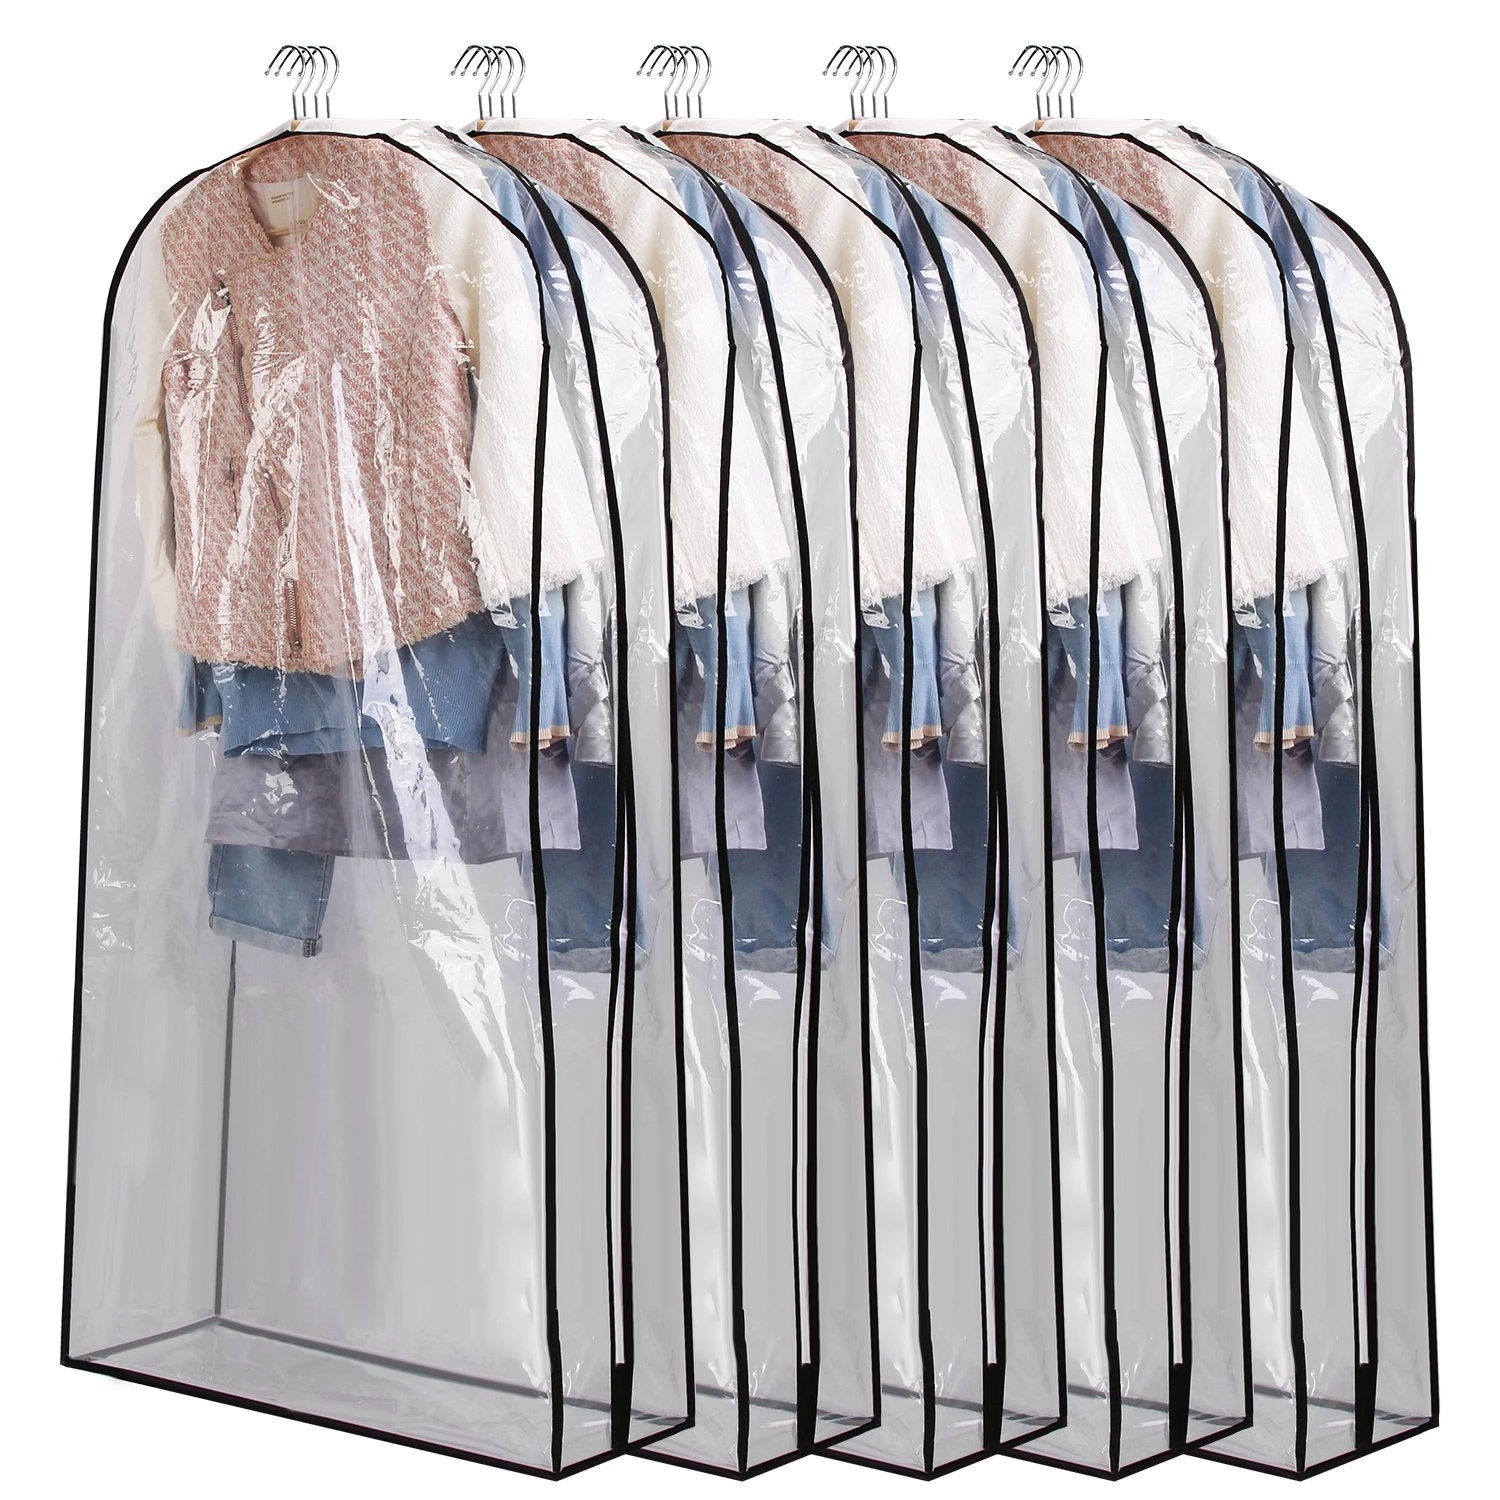 5 Pack Garment Bag for Hanging Clothes Dustproof Waterproof Hanging Clothes Storage